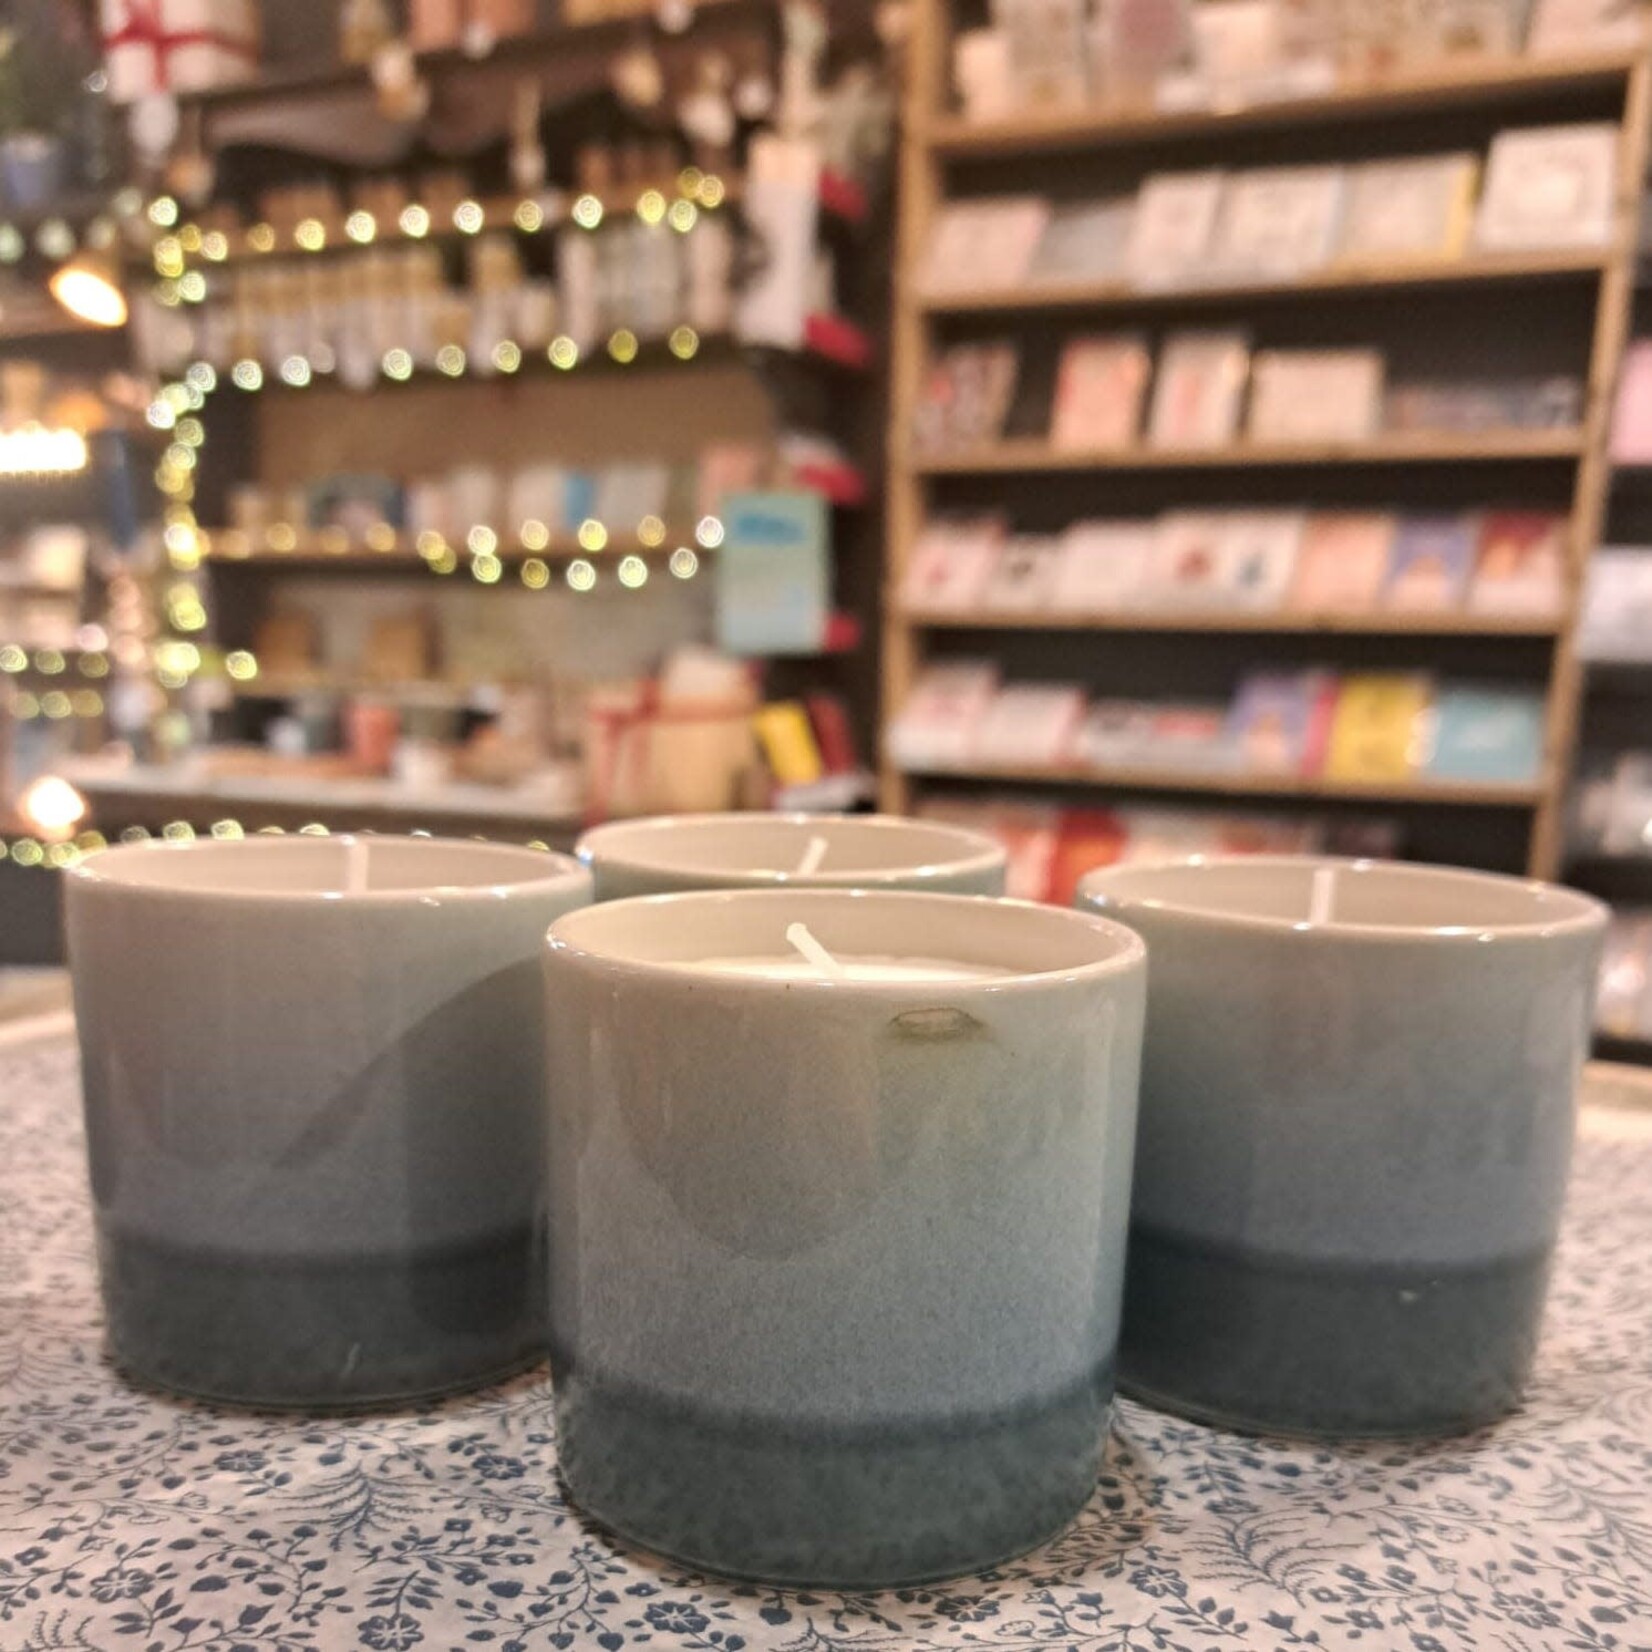 St. Eval St Eval Fig Tree Candle, Sea and Shore Pot